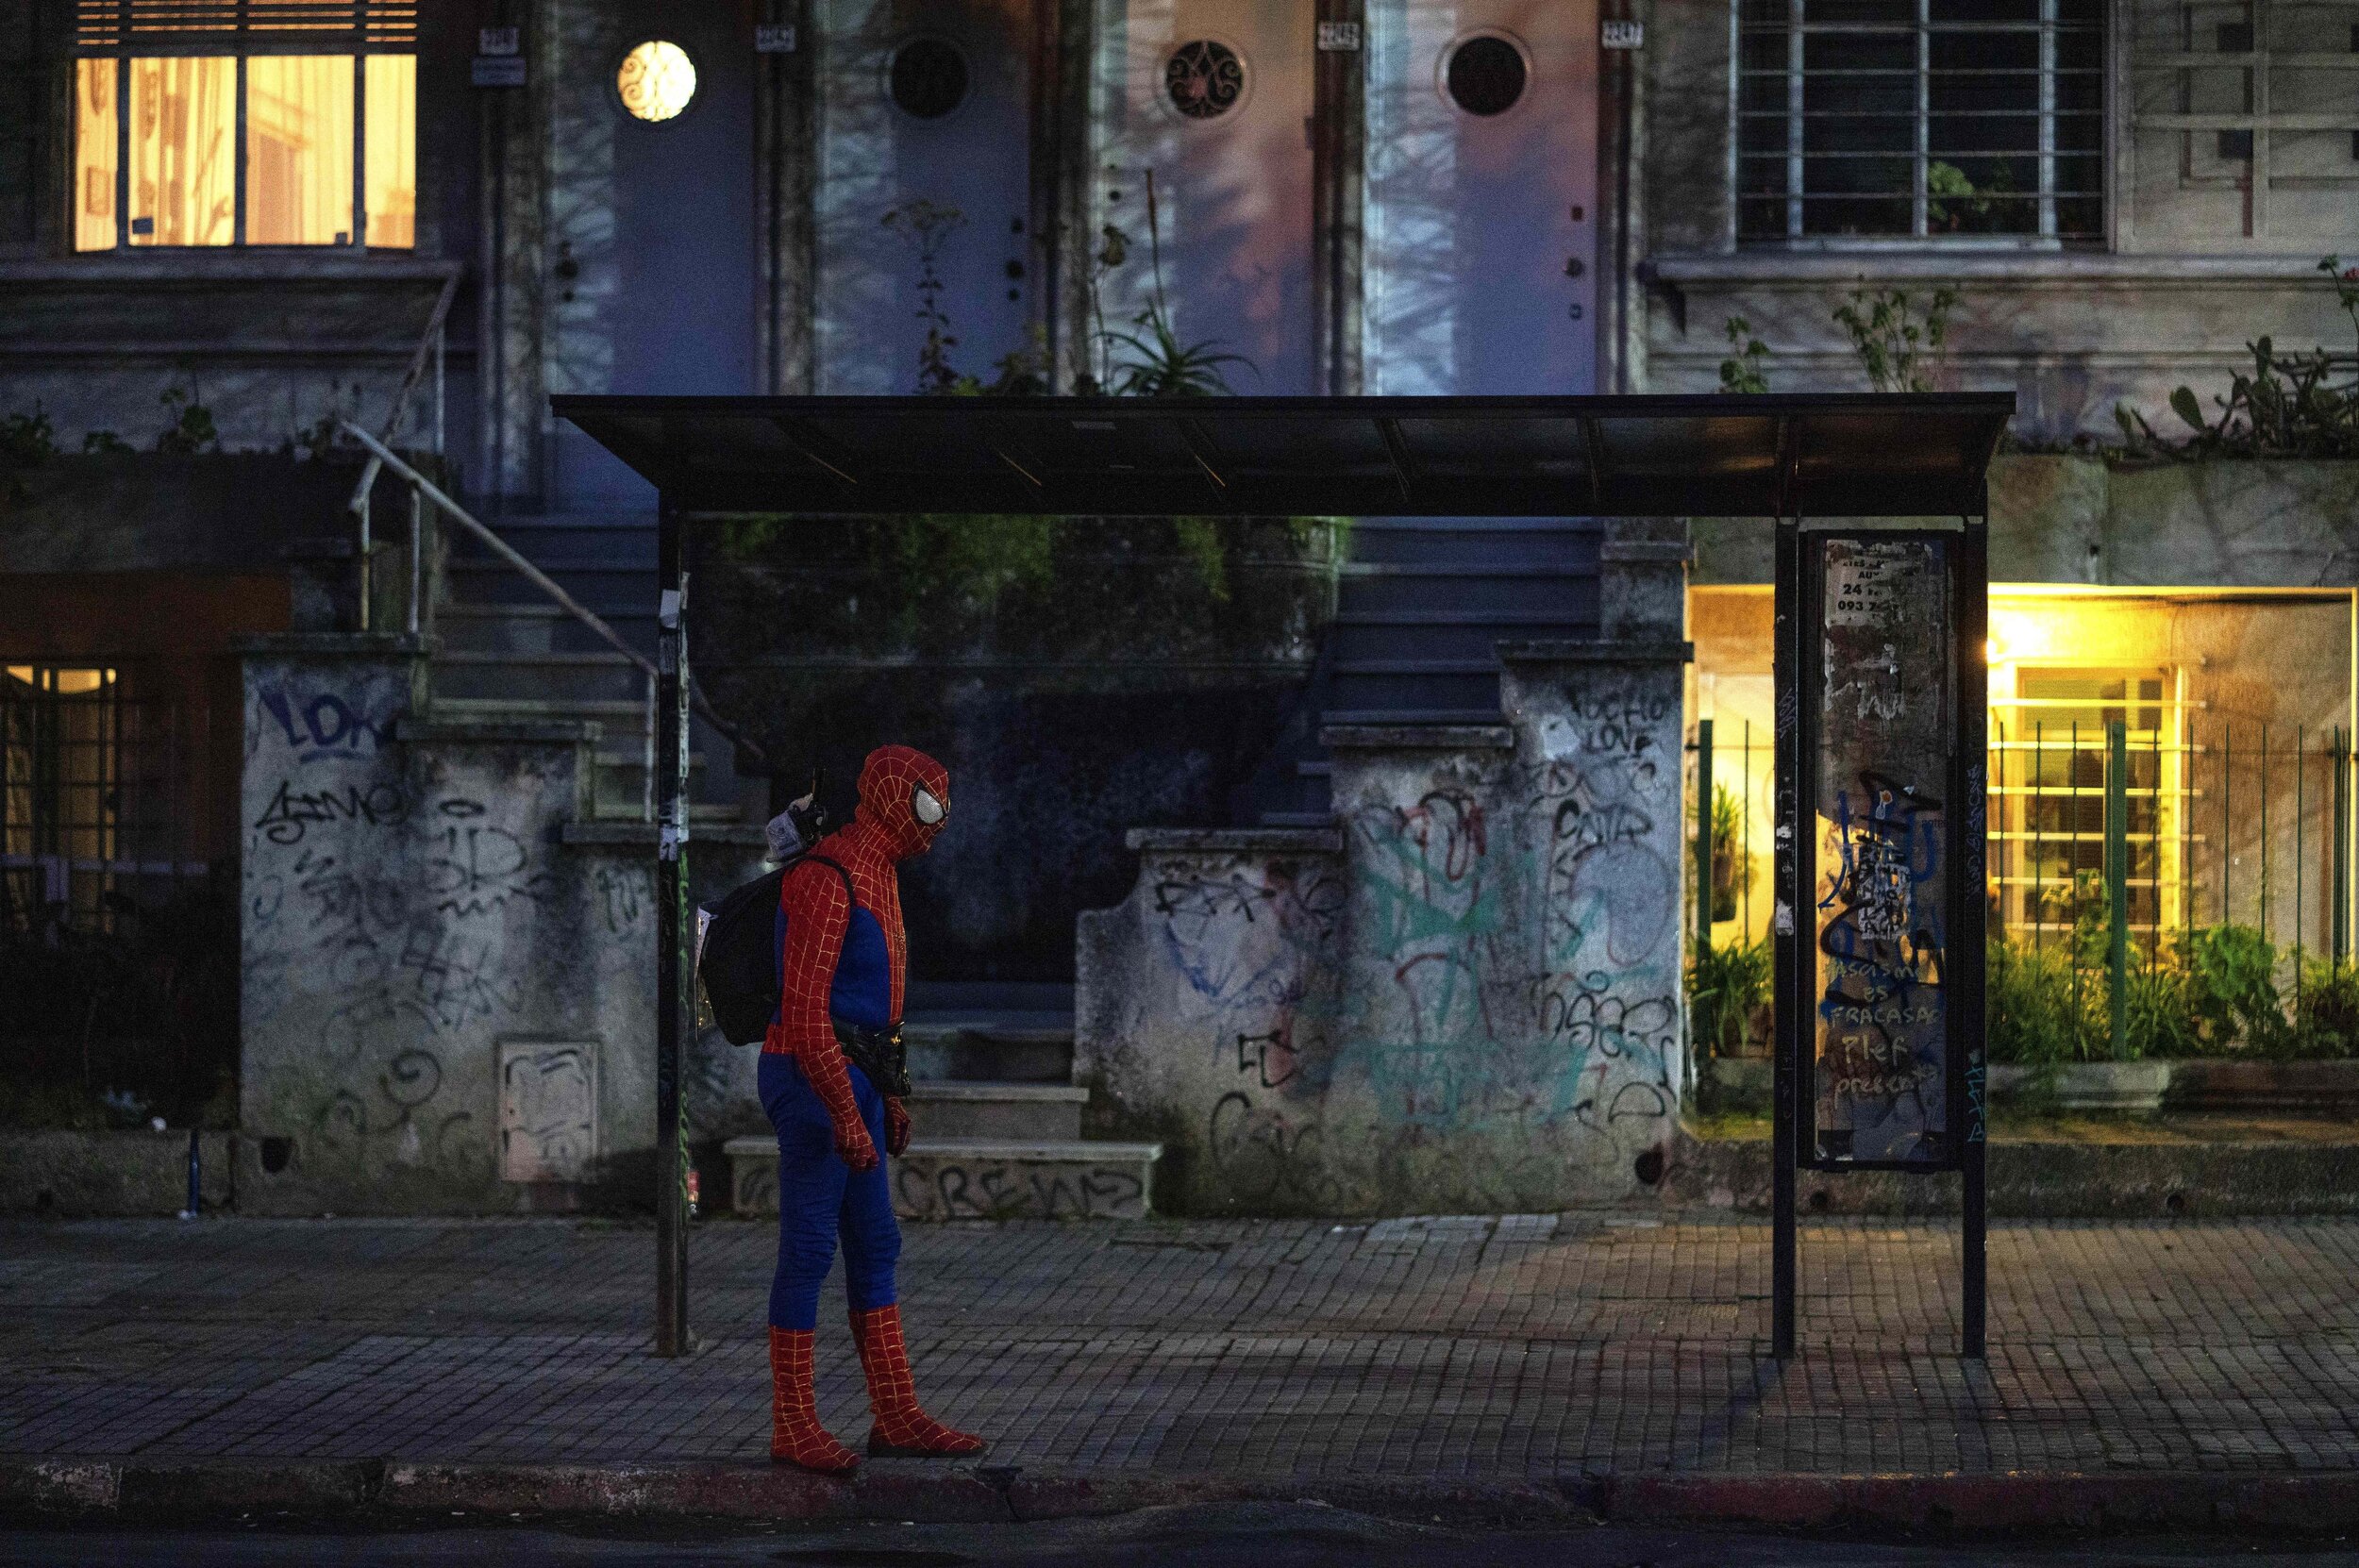  A man in a Spiderman costume waits for the bus in Montevideo, Uruguay, Sunday, Aug. 2, 2020, the night before the reopening of cinemas, theaters and museums that were closed to curb the spread of the new coronavirus. (AP Photo/Matilde Campodonico) 